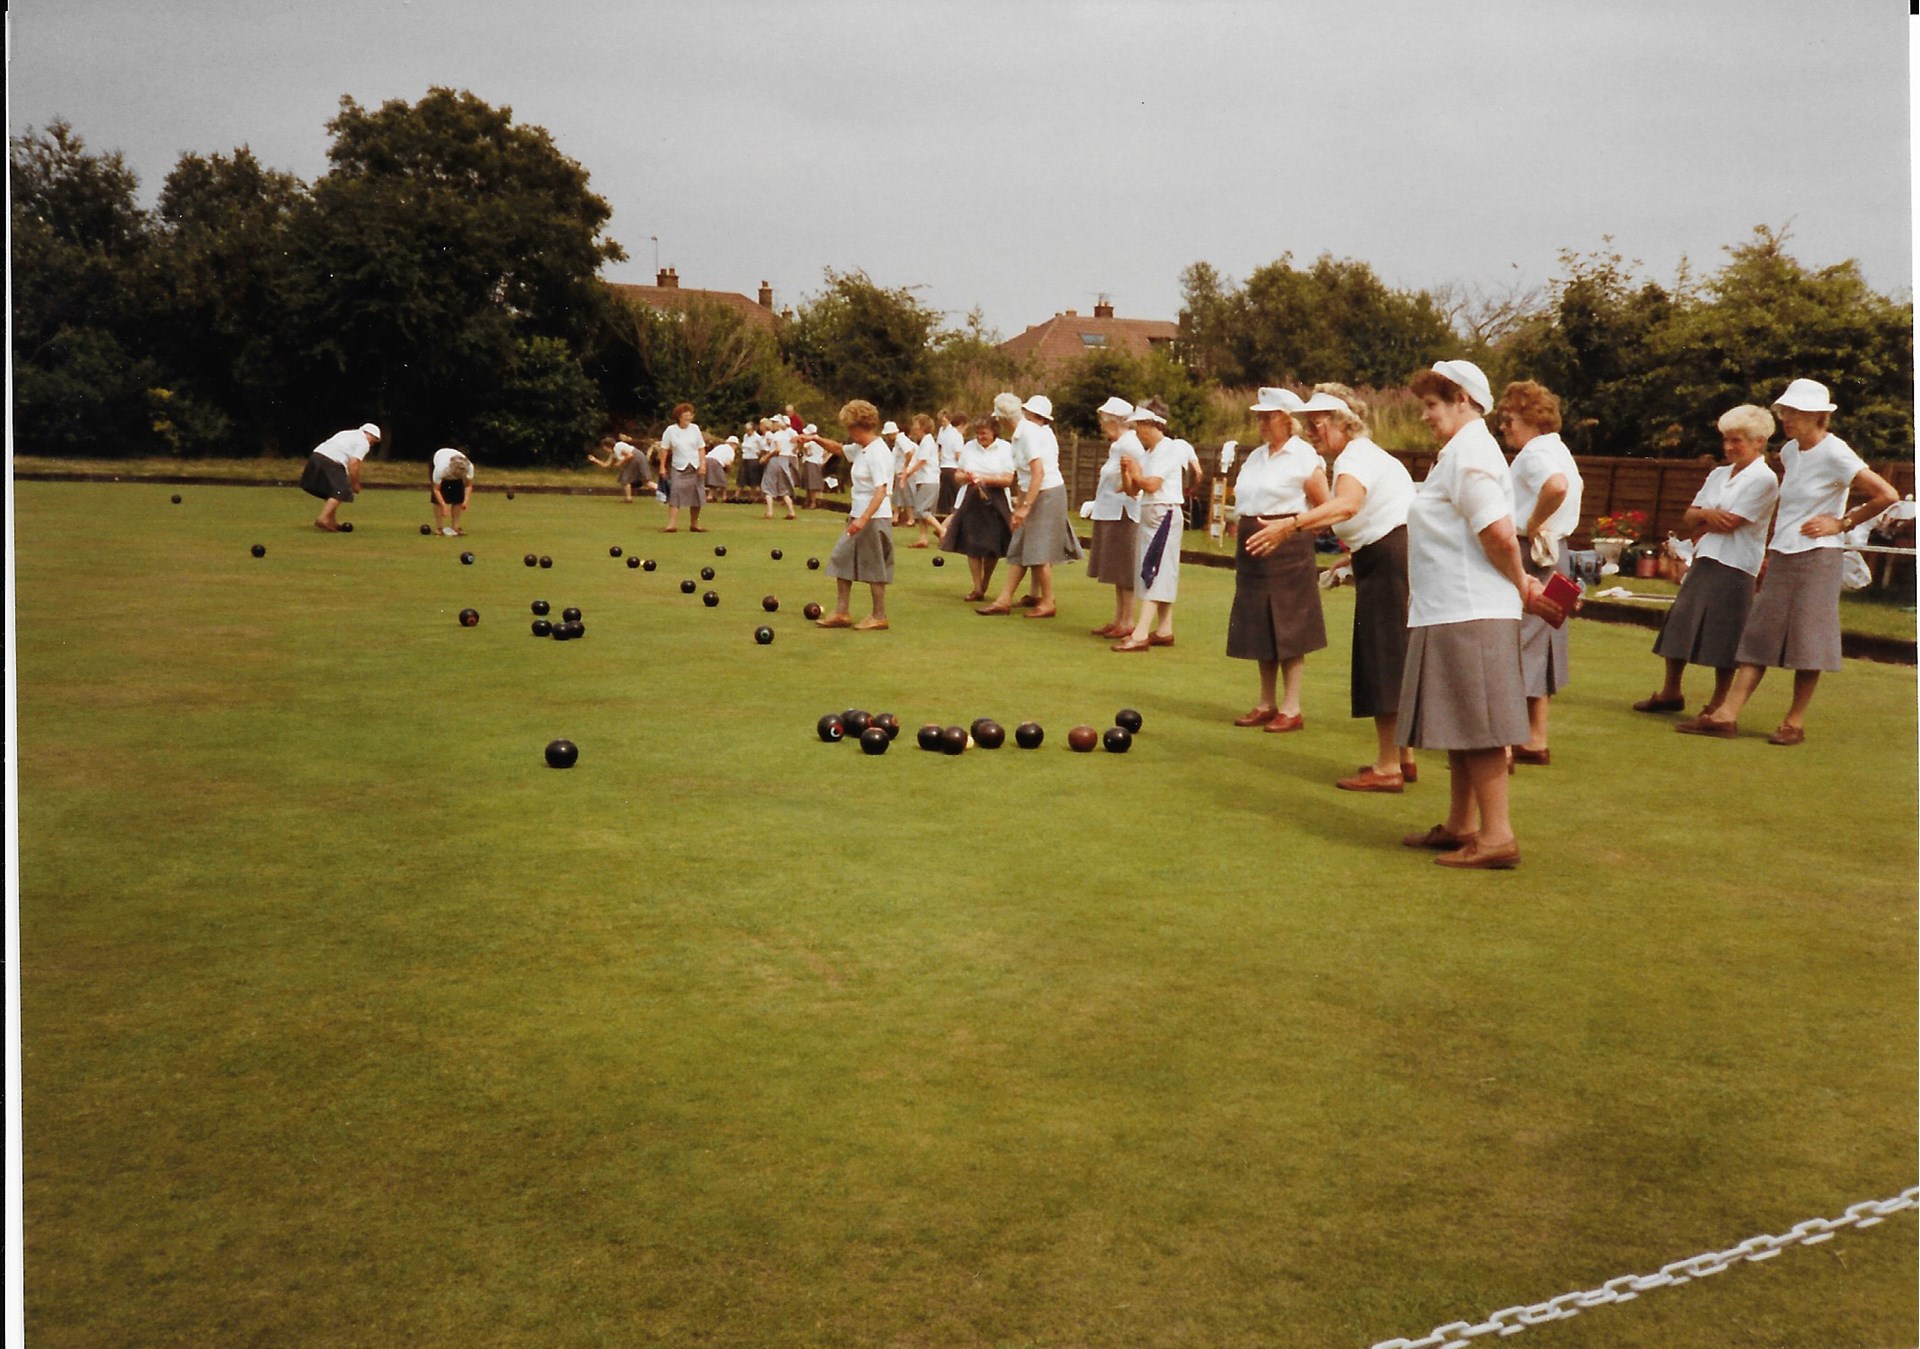 Nunthorpe Bowling Club Other photographs (some dated)